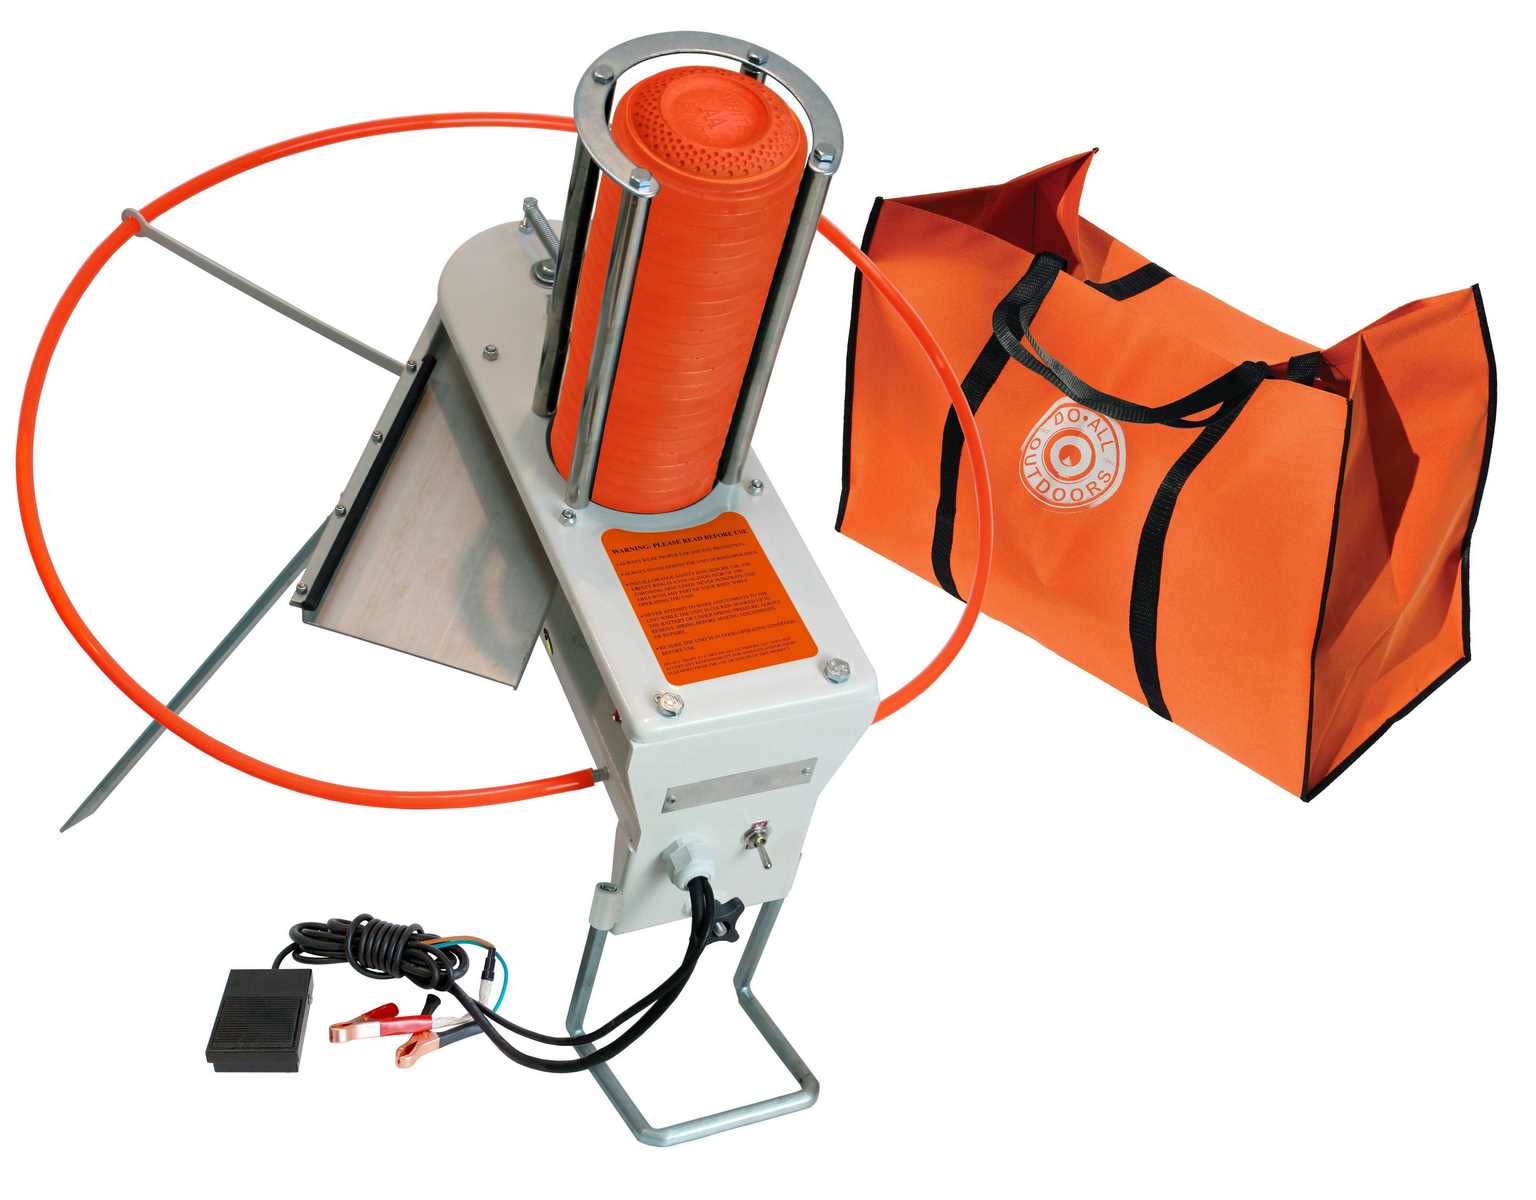 Image of Do All Fire Fly Auto Trap with Carry Bag ID 649898142425